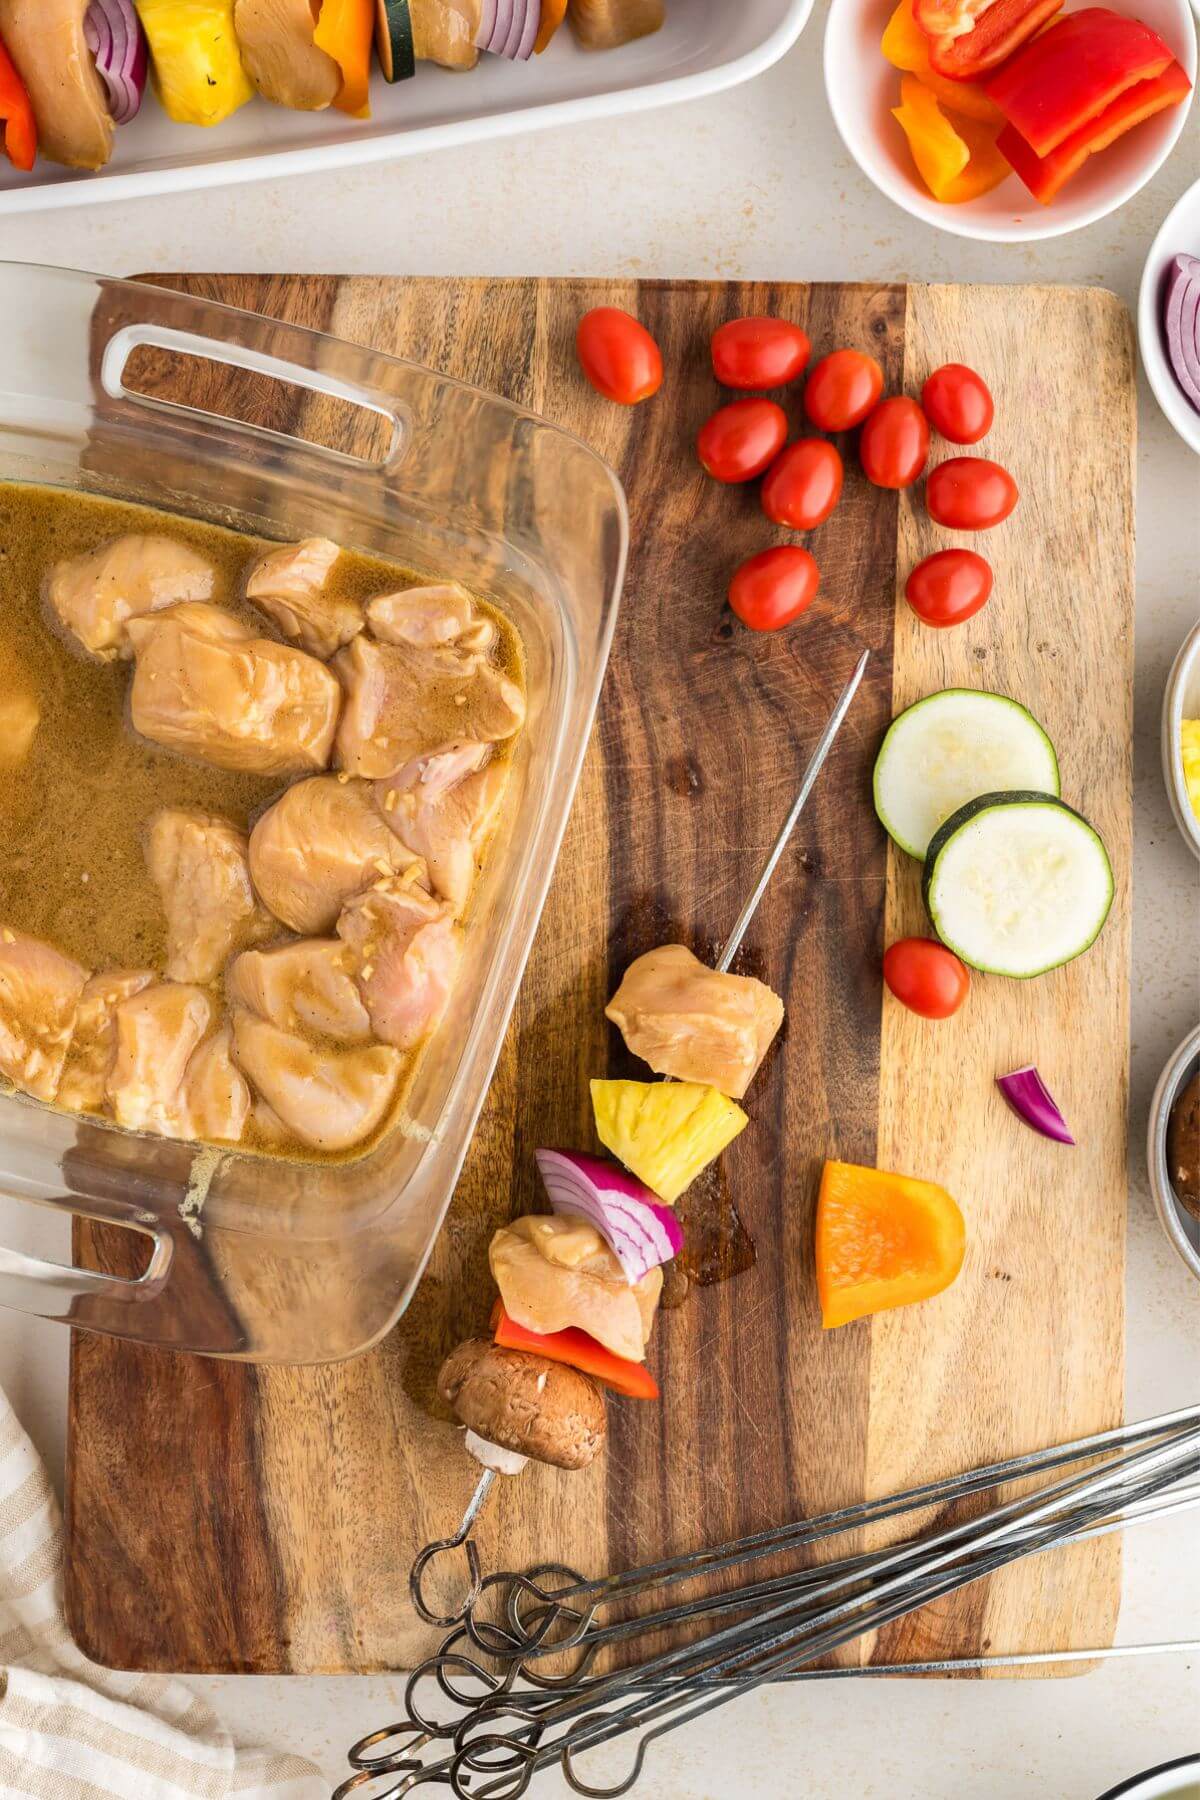 Cutting board with the dish of marinating chicken chunks and a skewer being assembled with veggies and meats near a group of skewers to make.